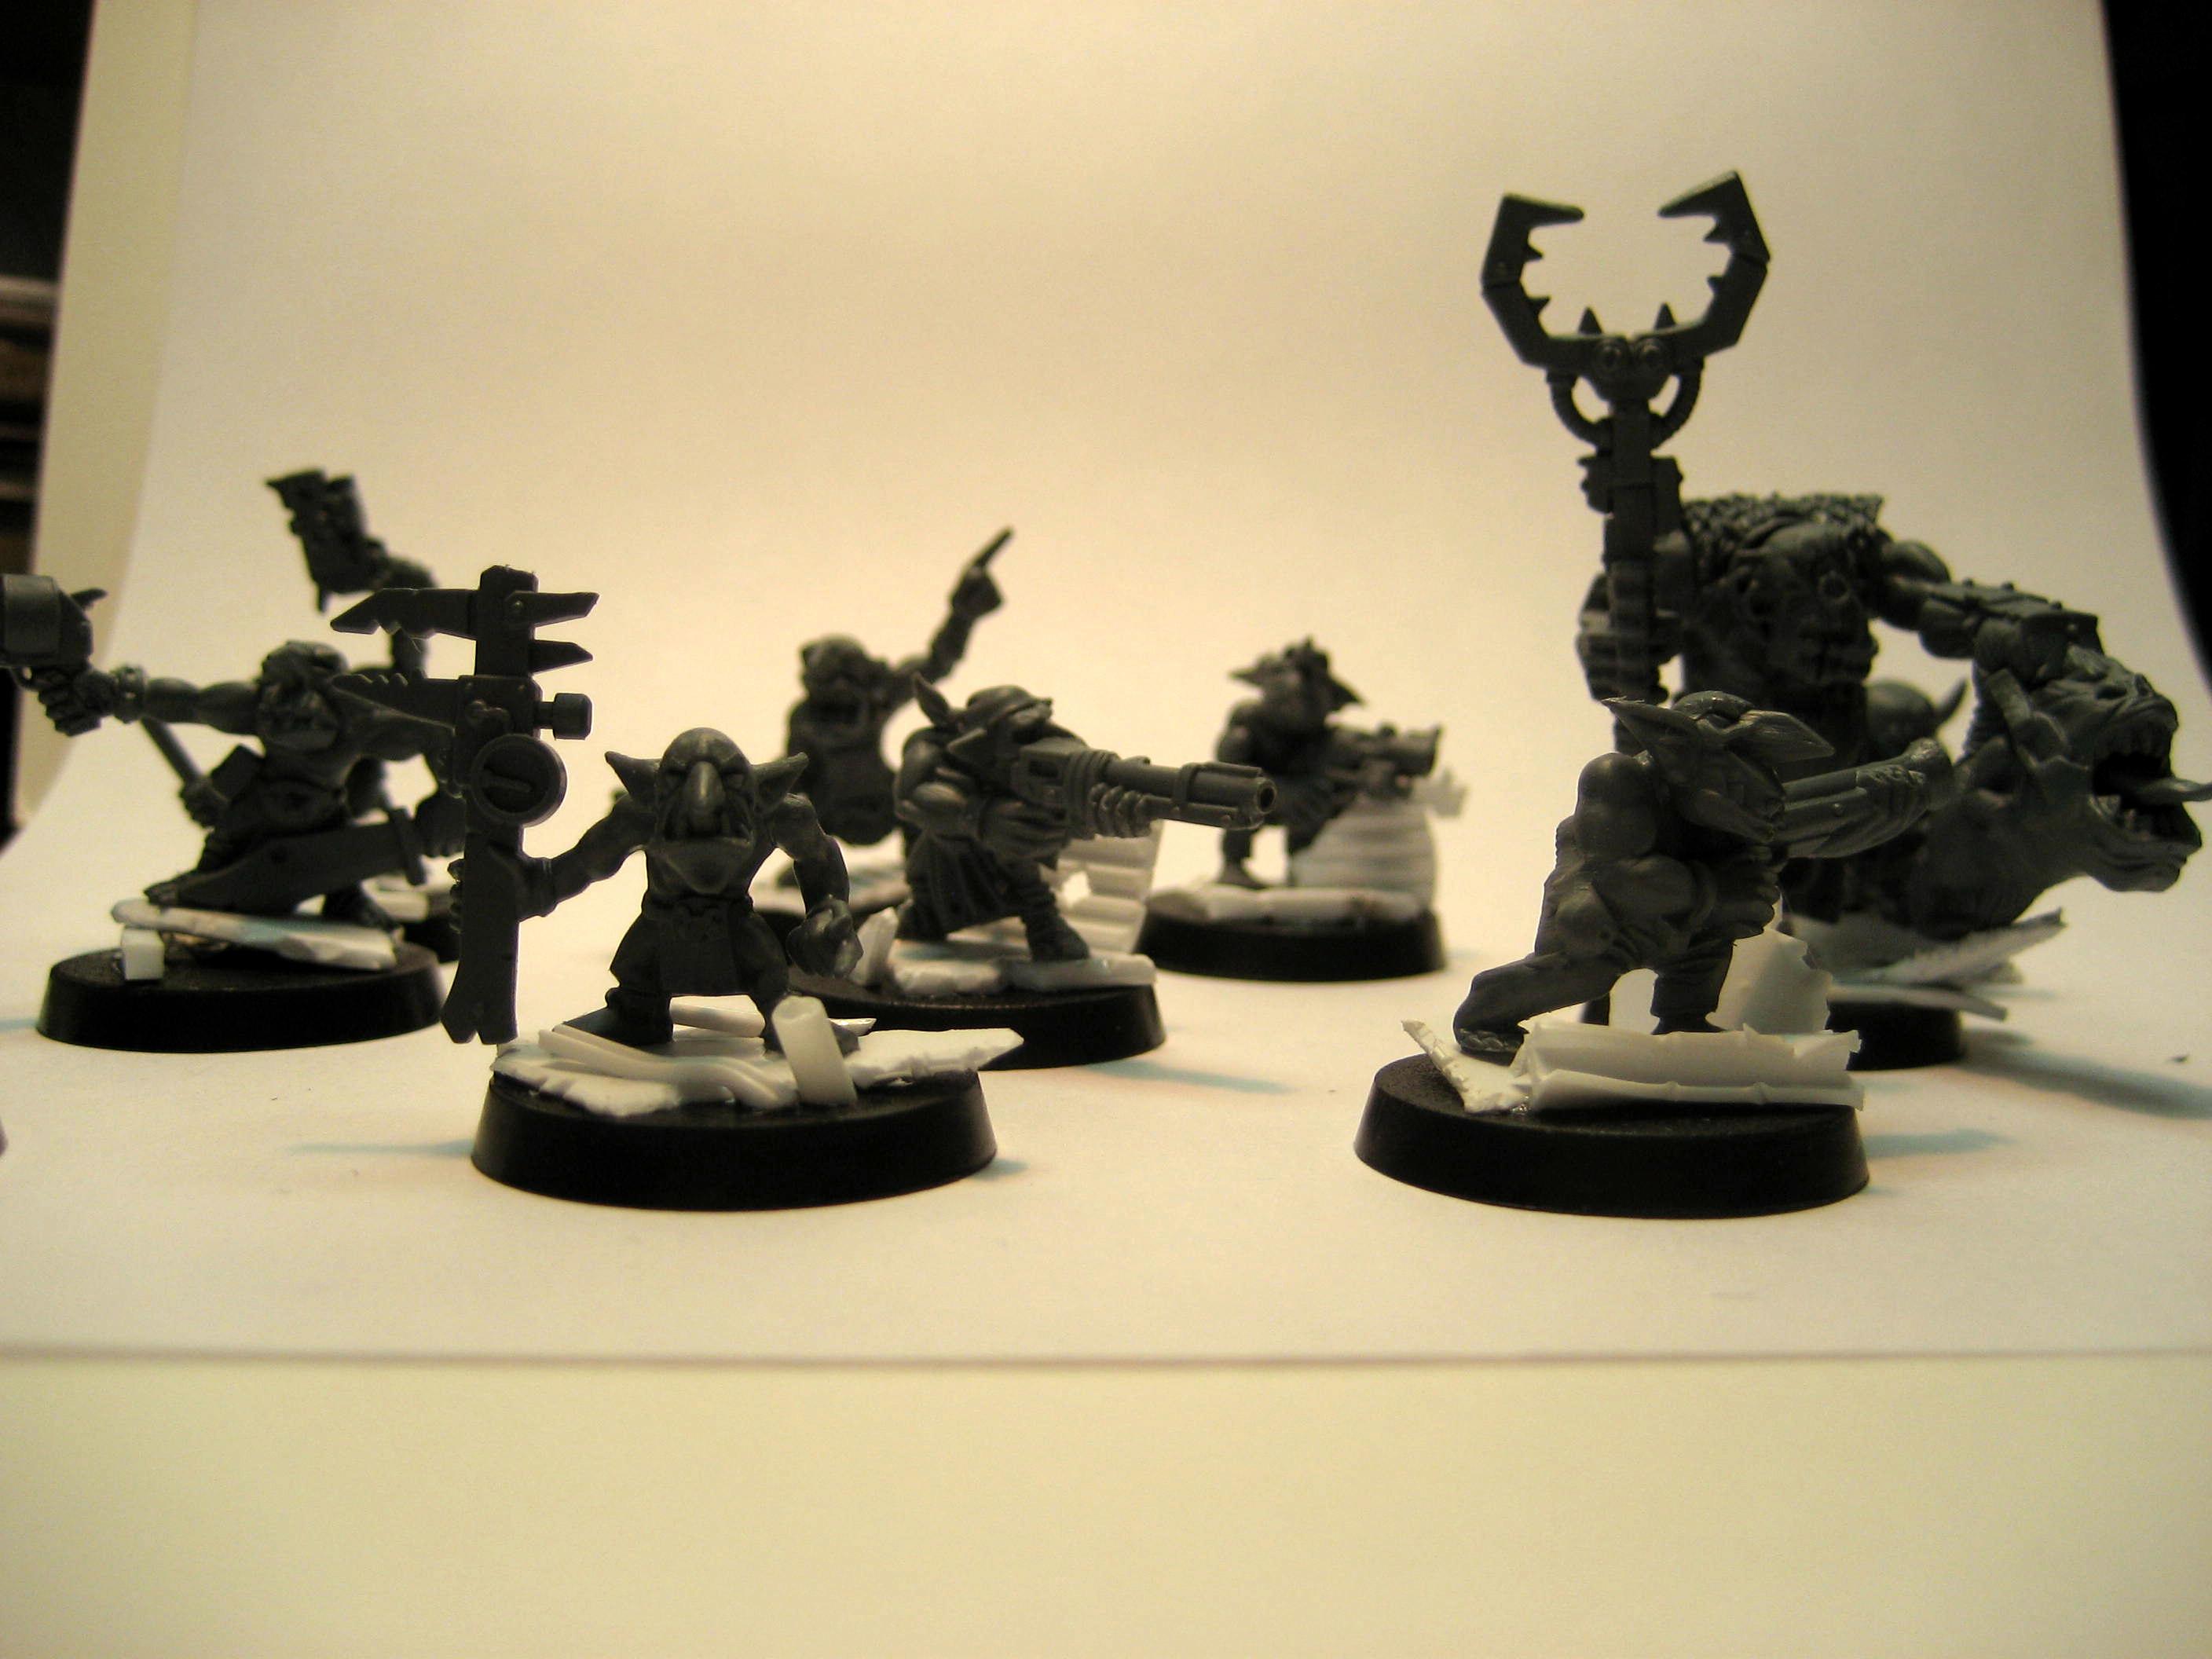 The Grot Pit Crew